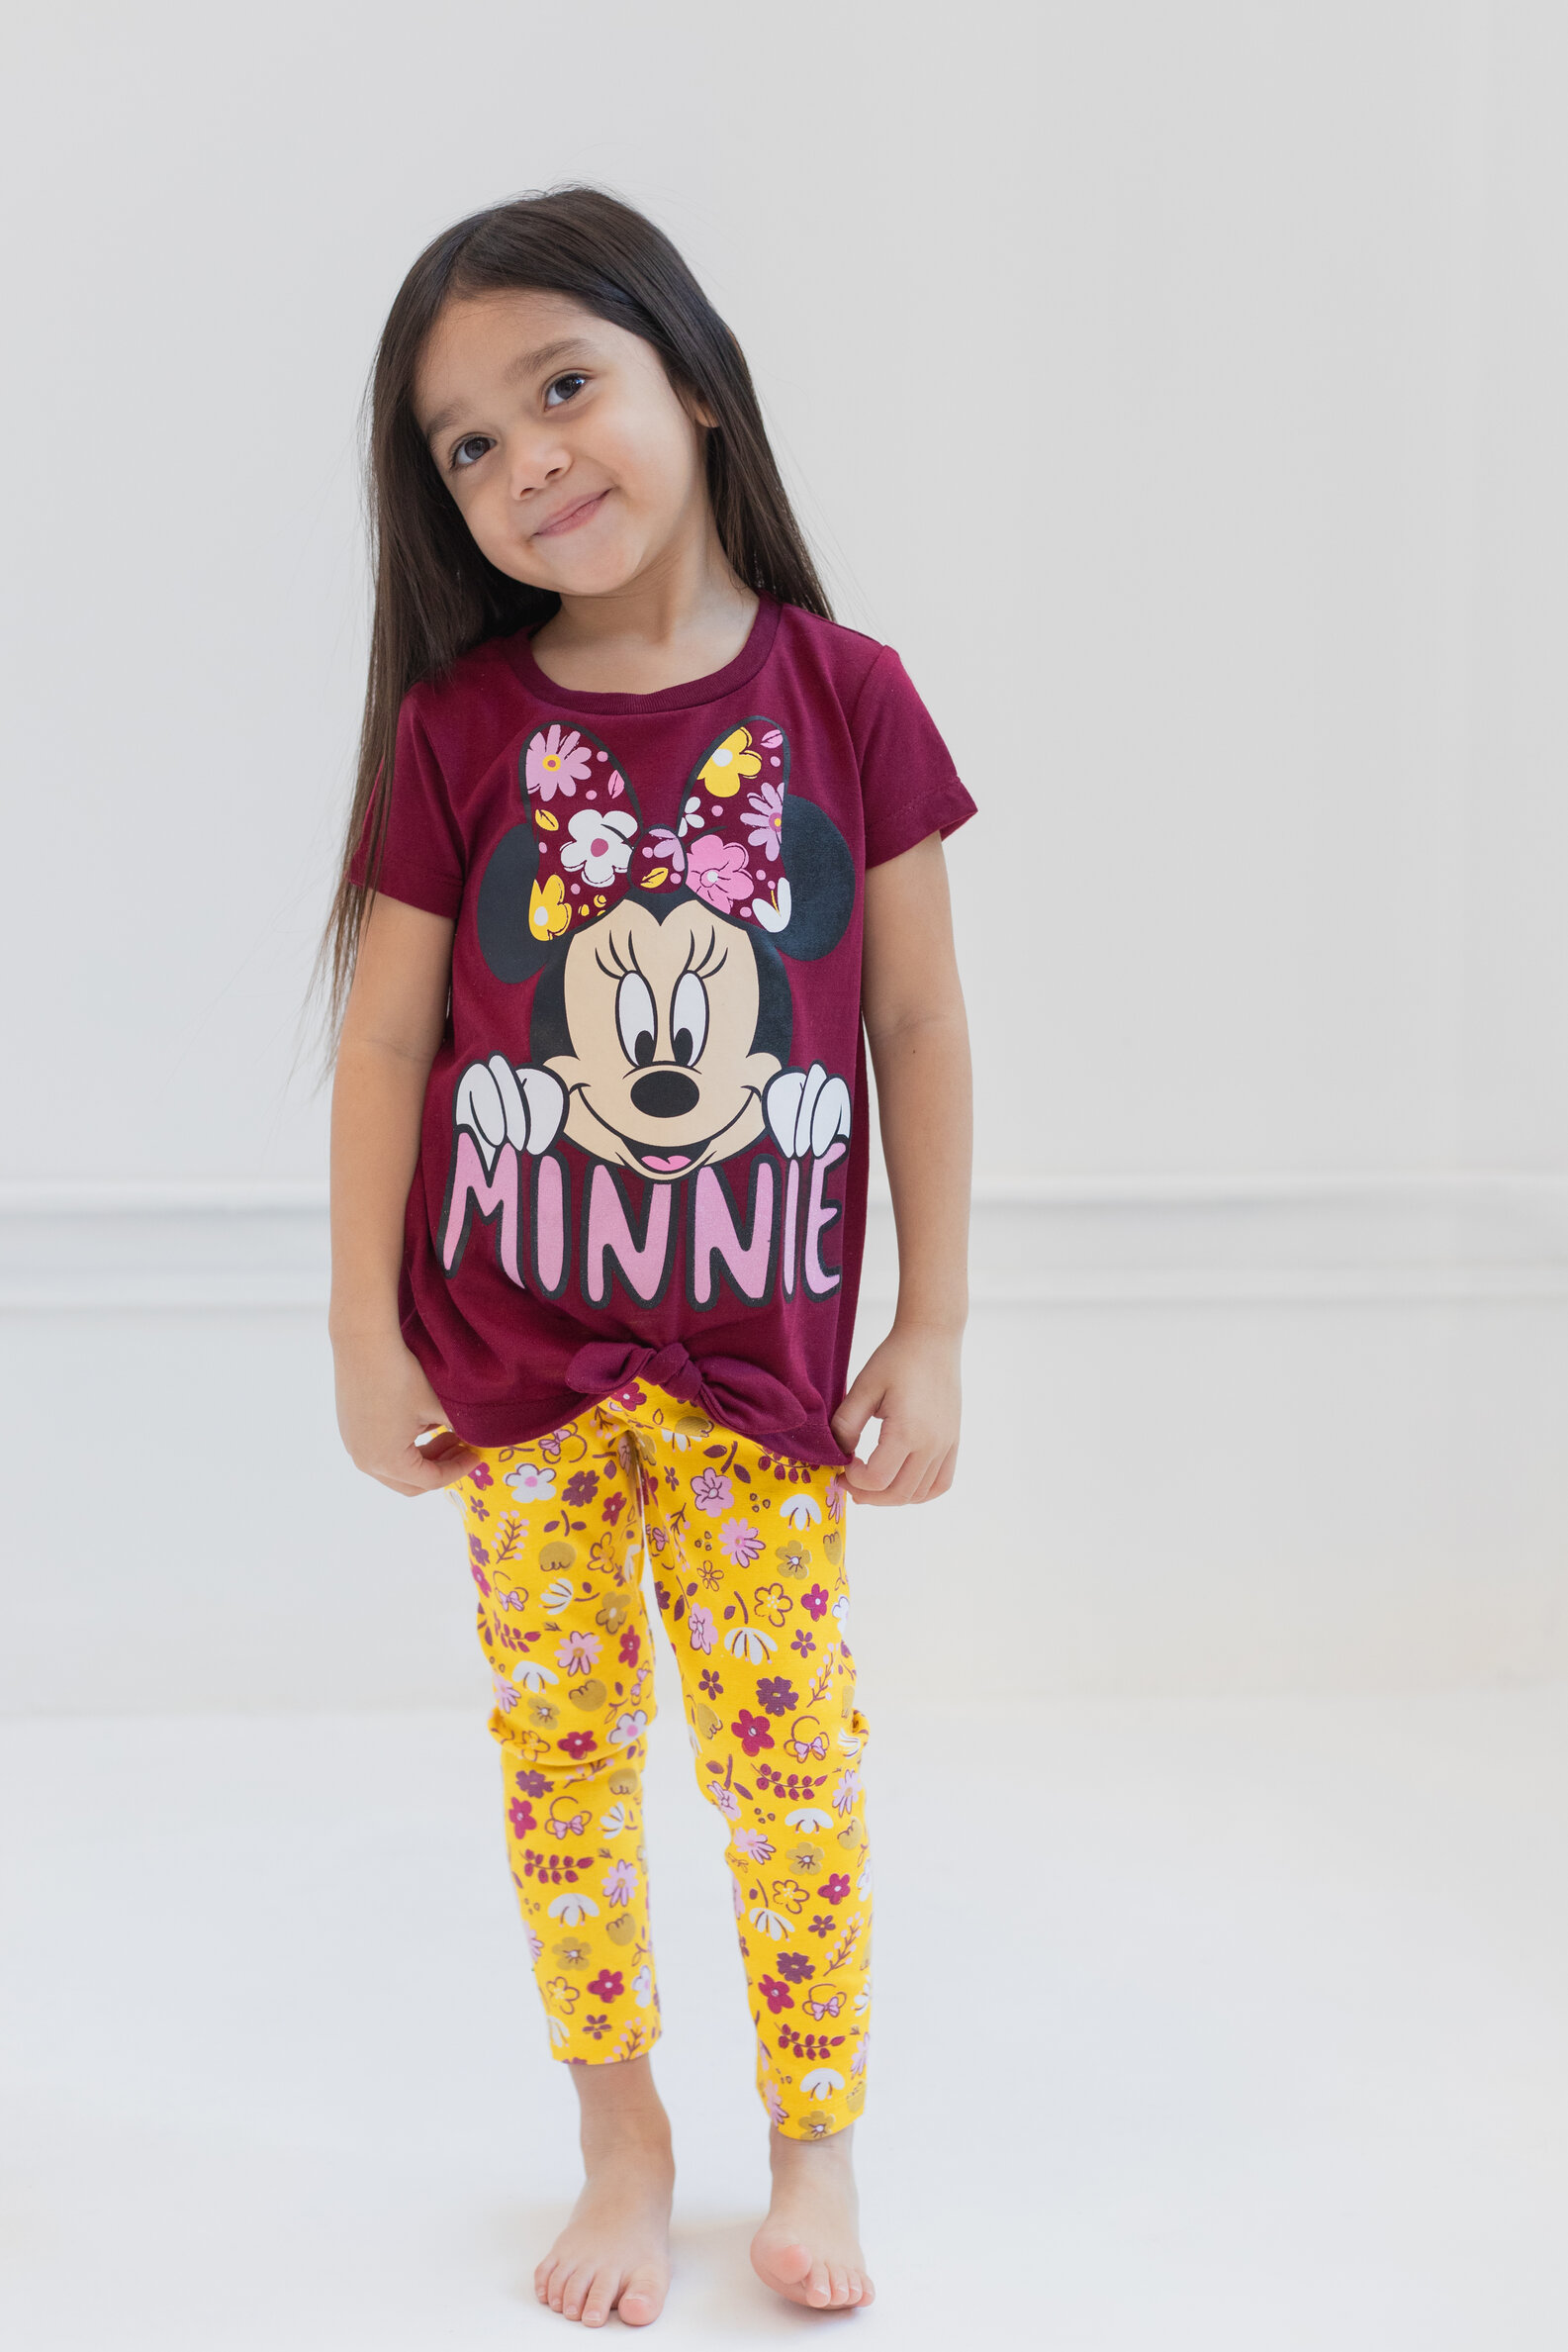 Disney Minnie Mouse Little Girls T-Shirt and Leggings Outfit Set Infant to Little Kid - image 2 of 5